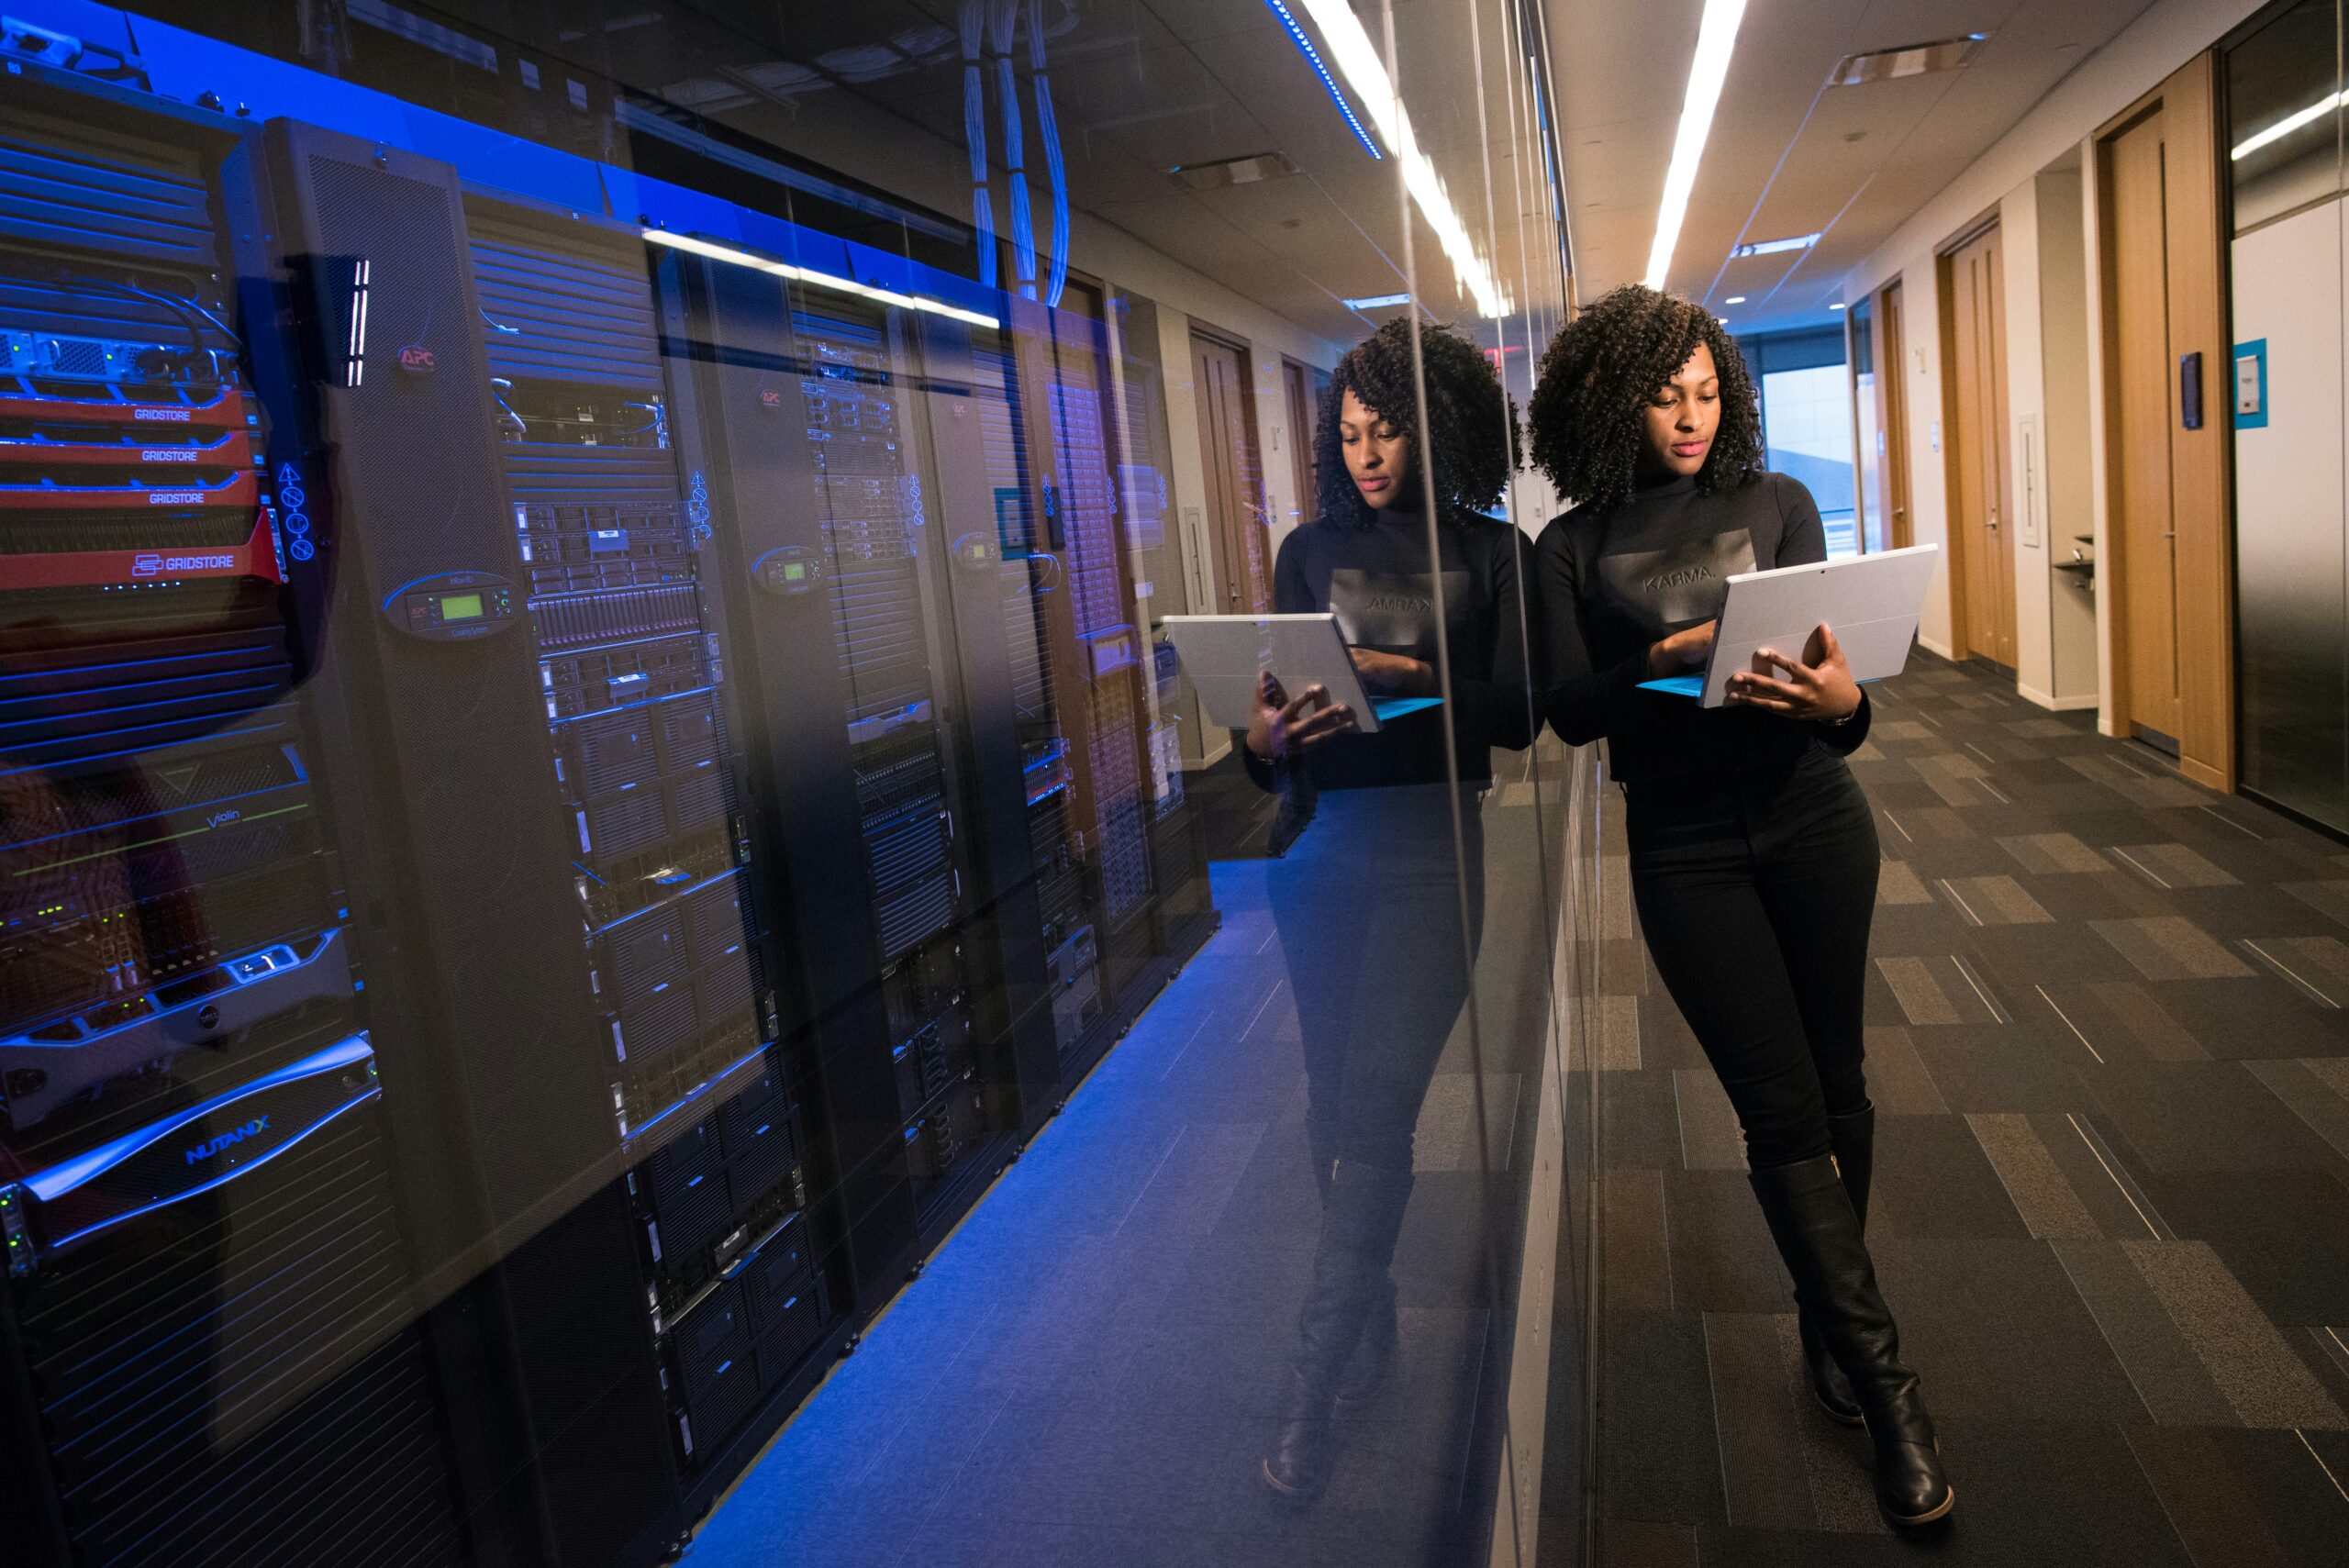 A woman using a tablet while walking through a service provider's server room with illuminated server racks on the left.